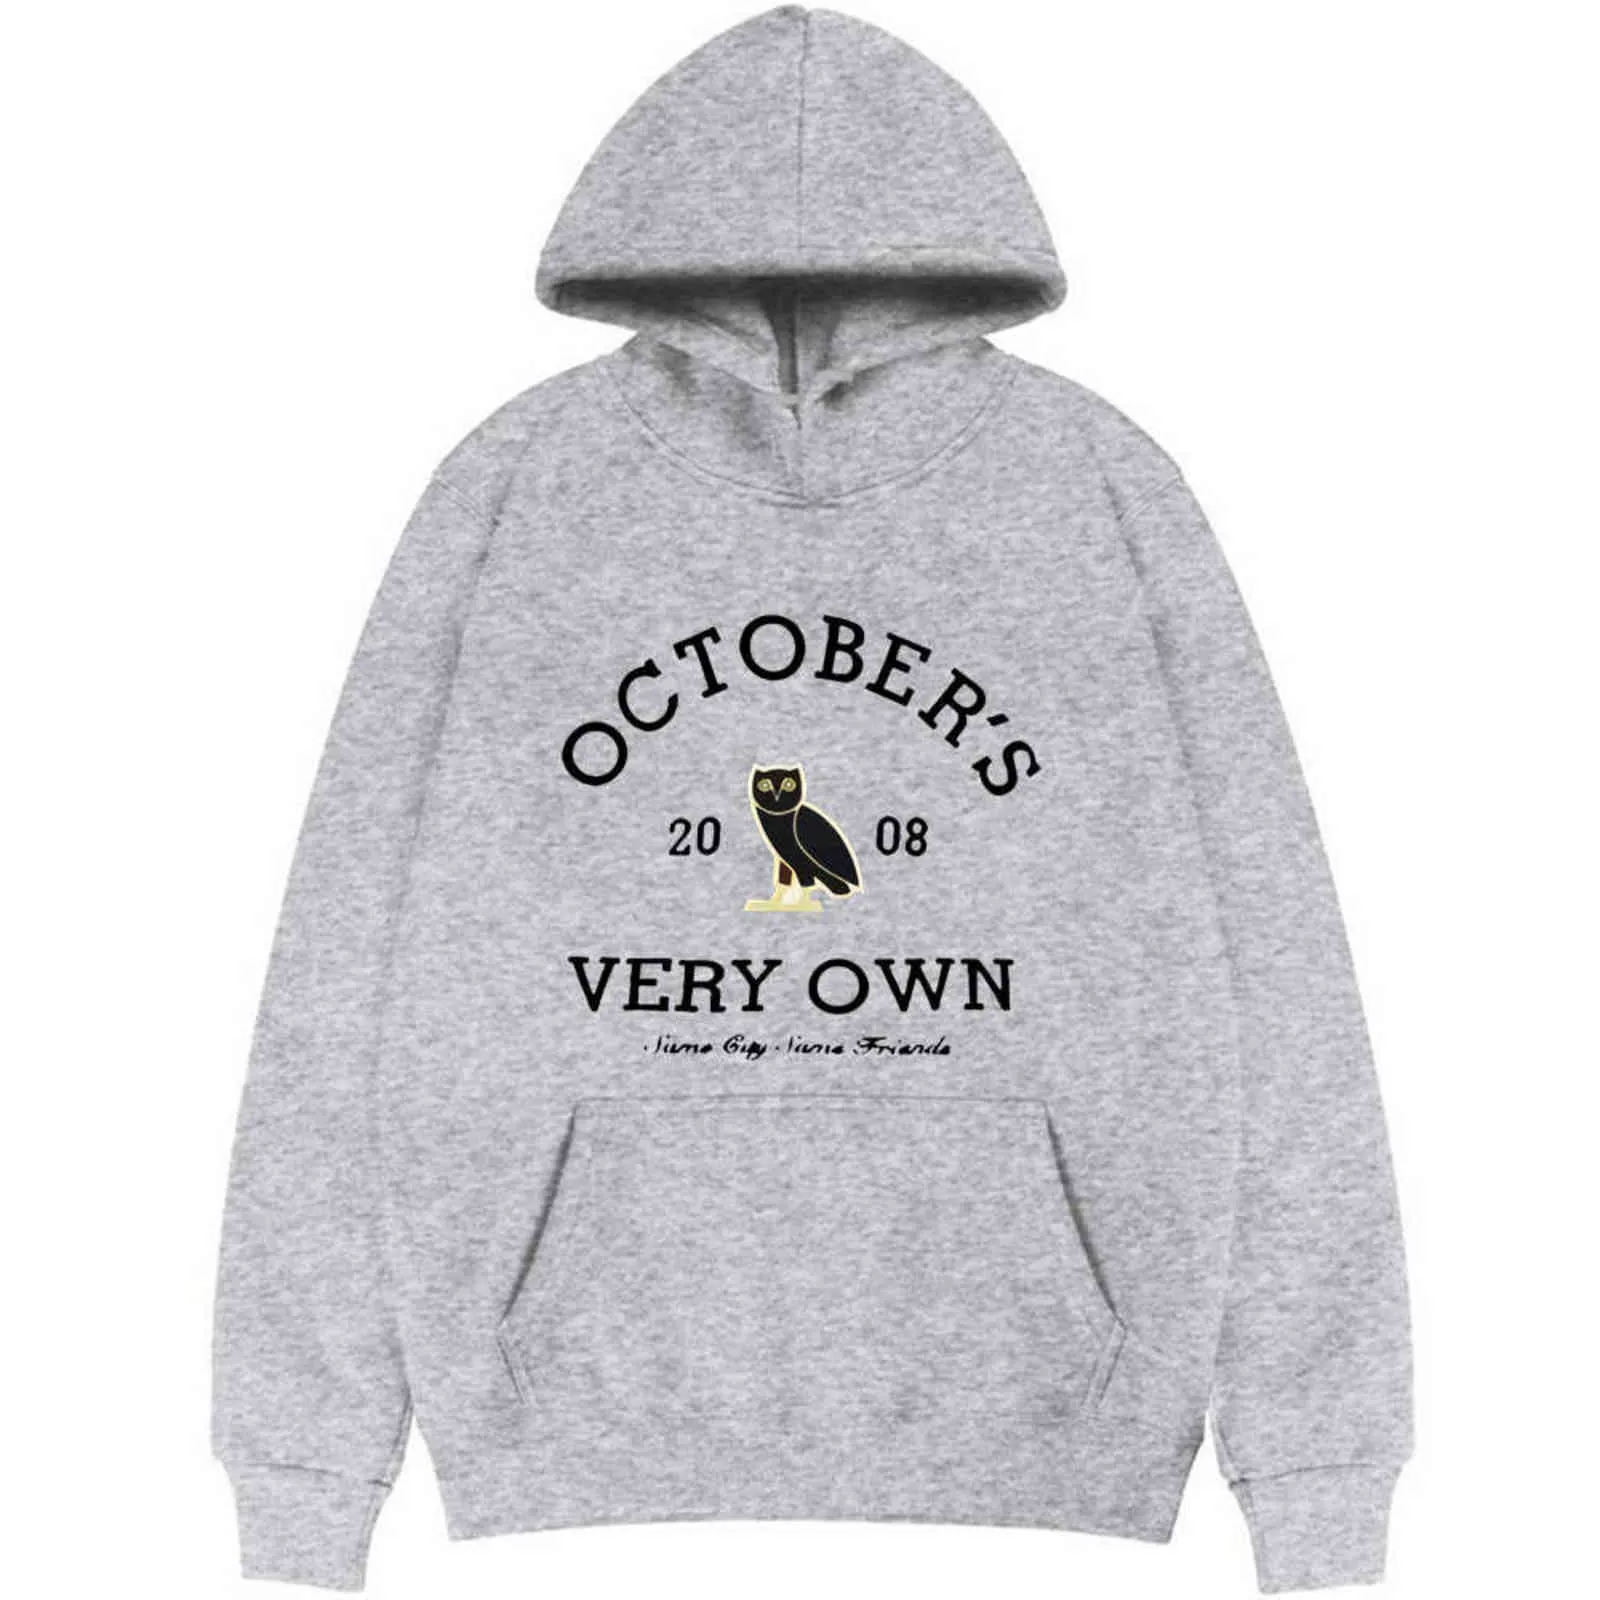 New Hot Hoodies October's Very Own Letter Tee Owl Print Couples Fashion Coat Long Sleeve Women All-match Sweatshirt Outwear Hot Selling